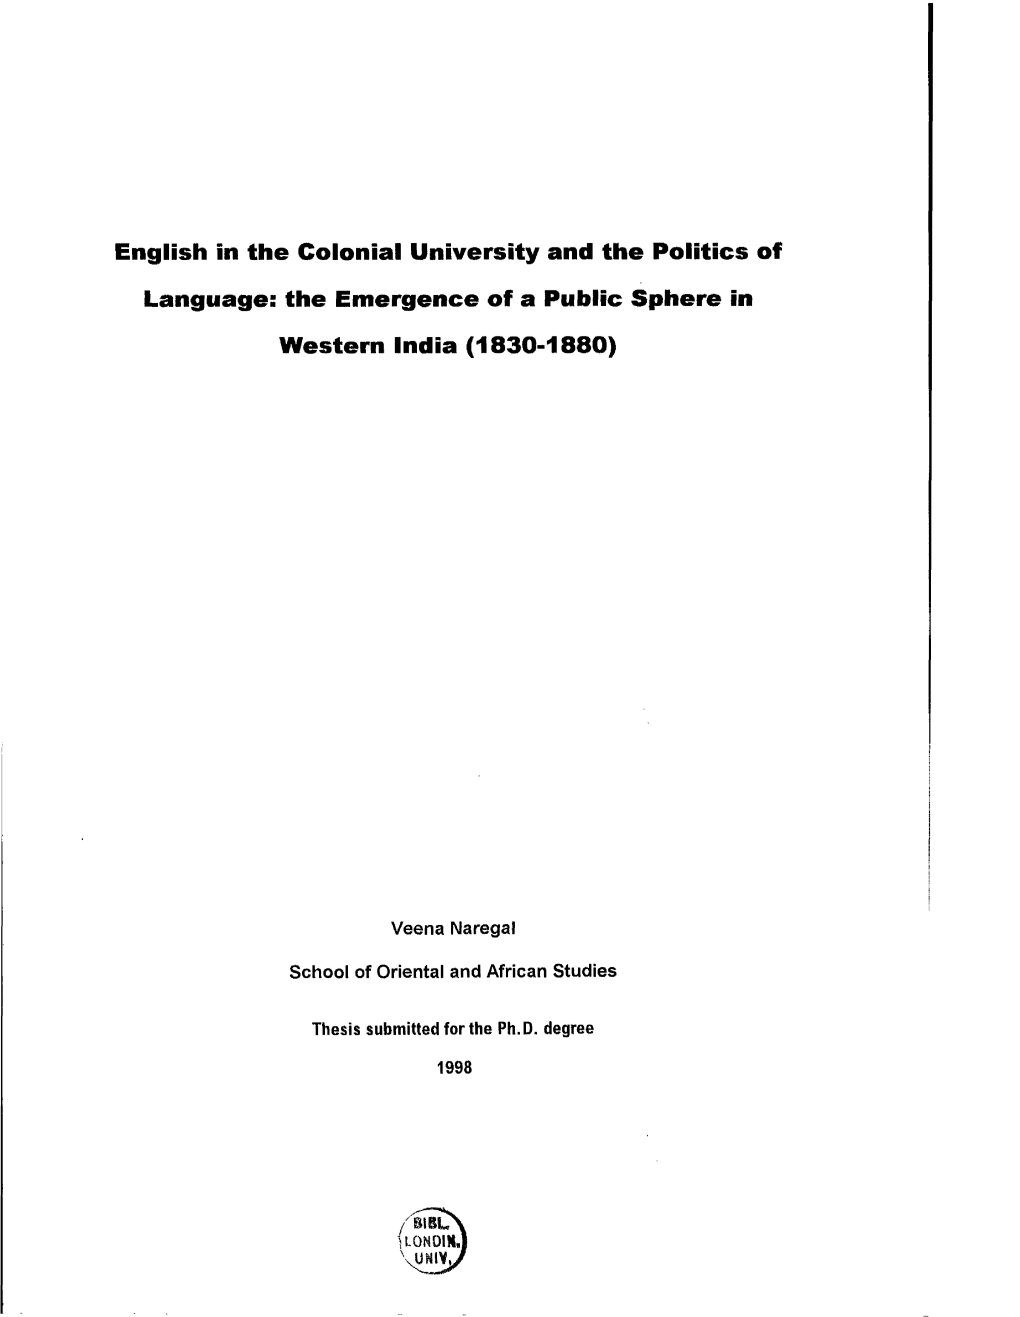 English in the Colonial University and the Politics of Language: The